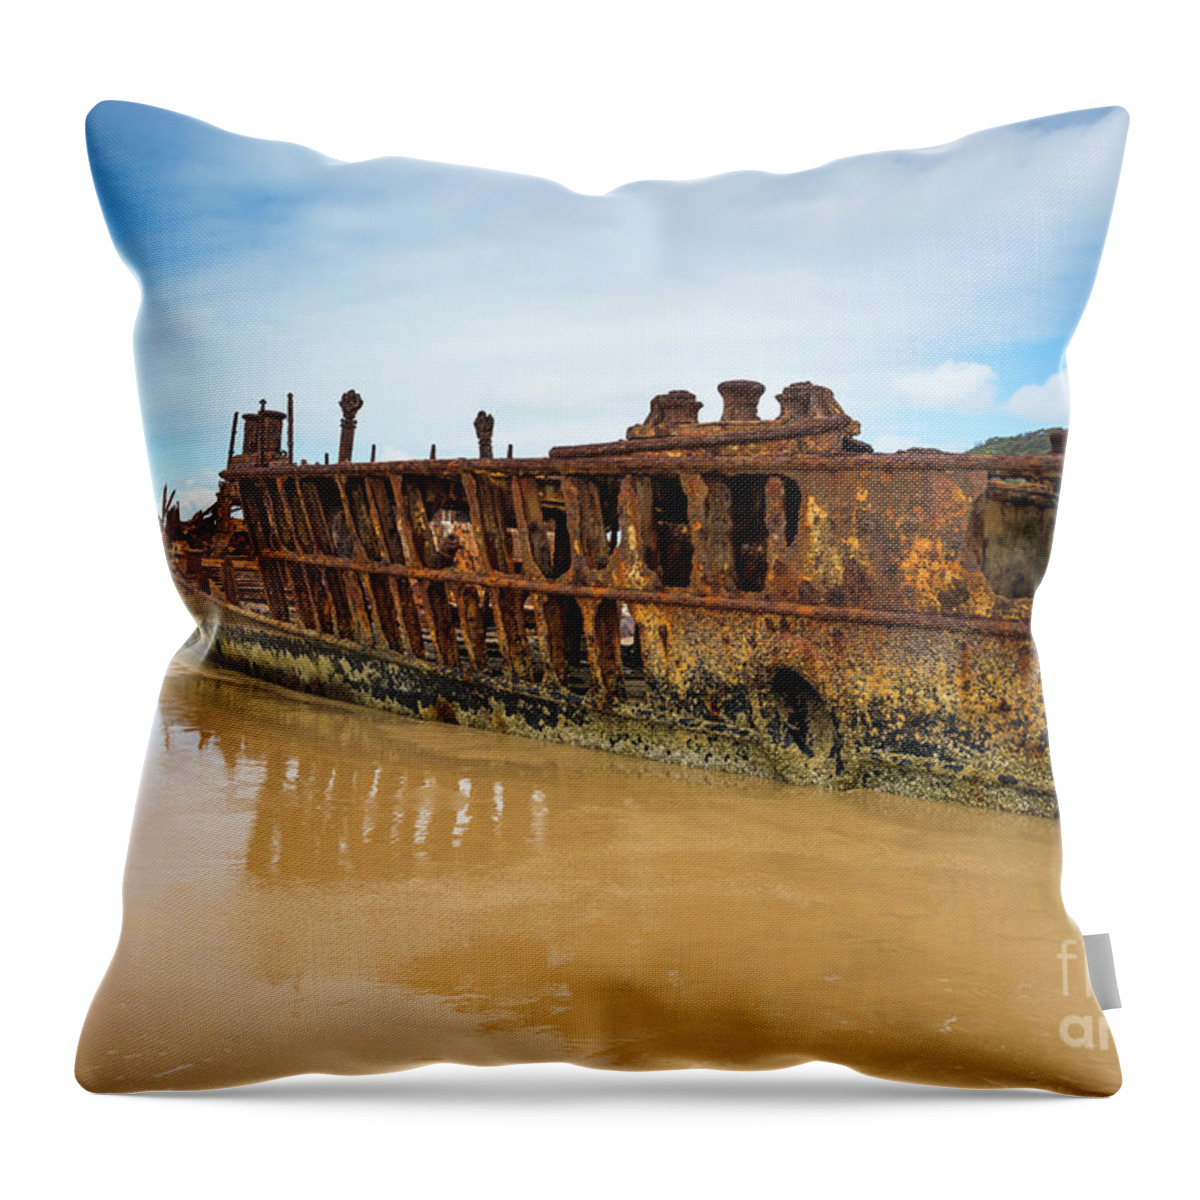 2017 Throw Pillow featuring the photograph Maheno Shipwreck by Andrew Michael